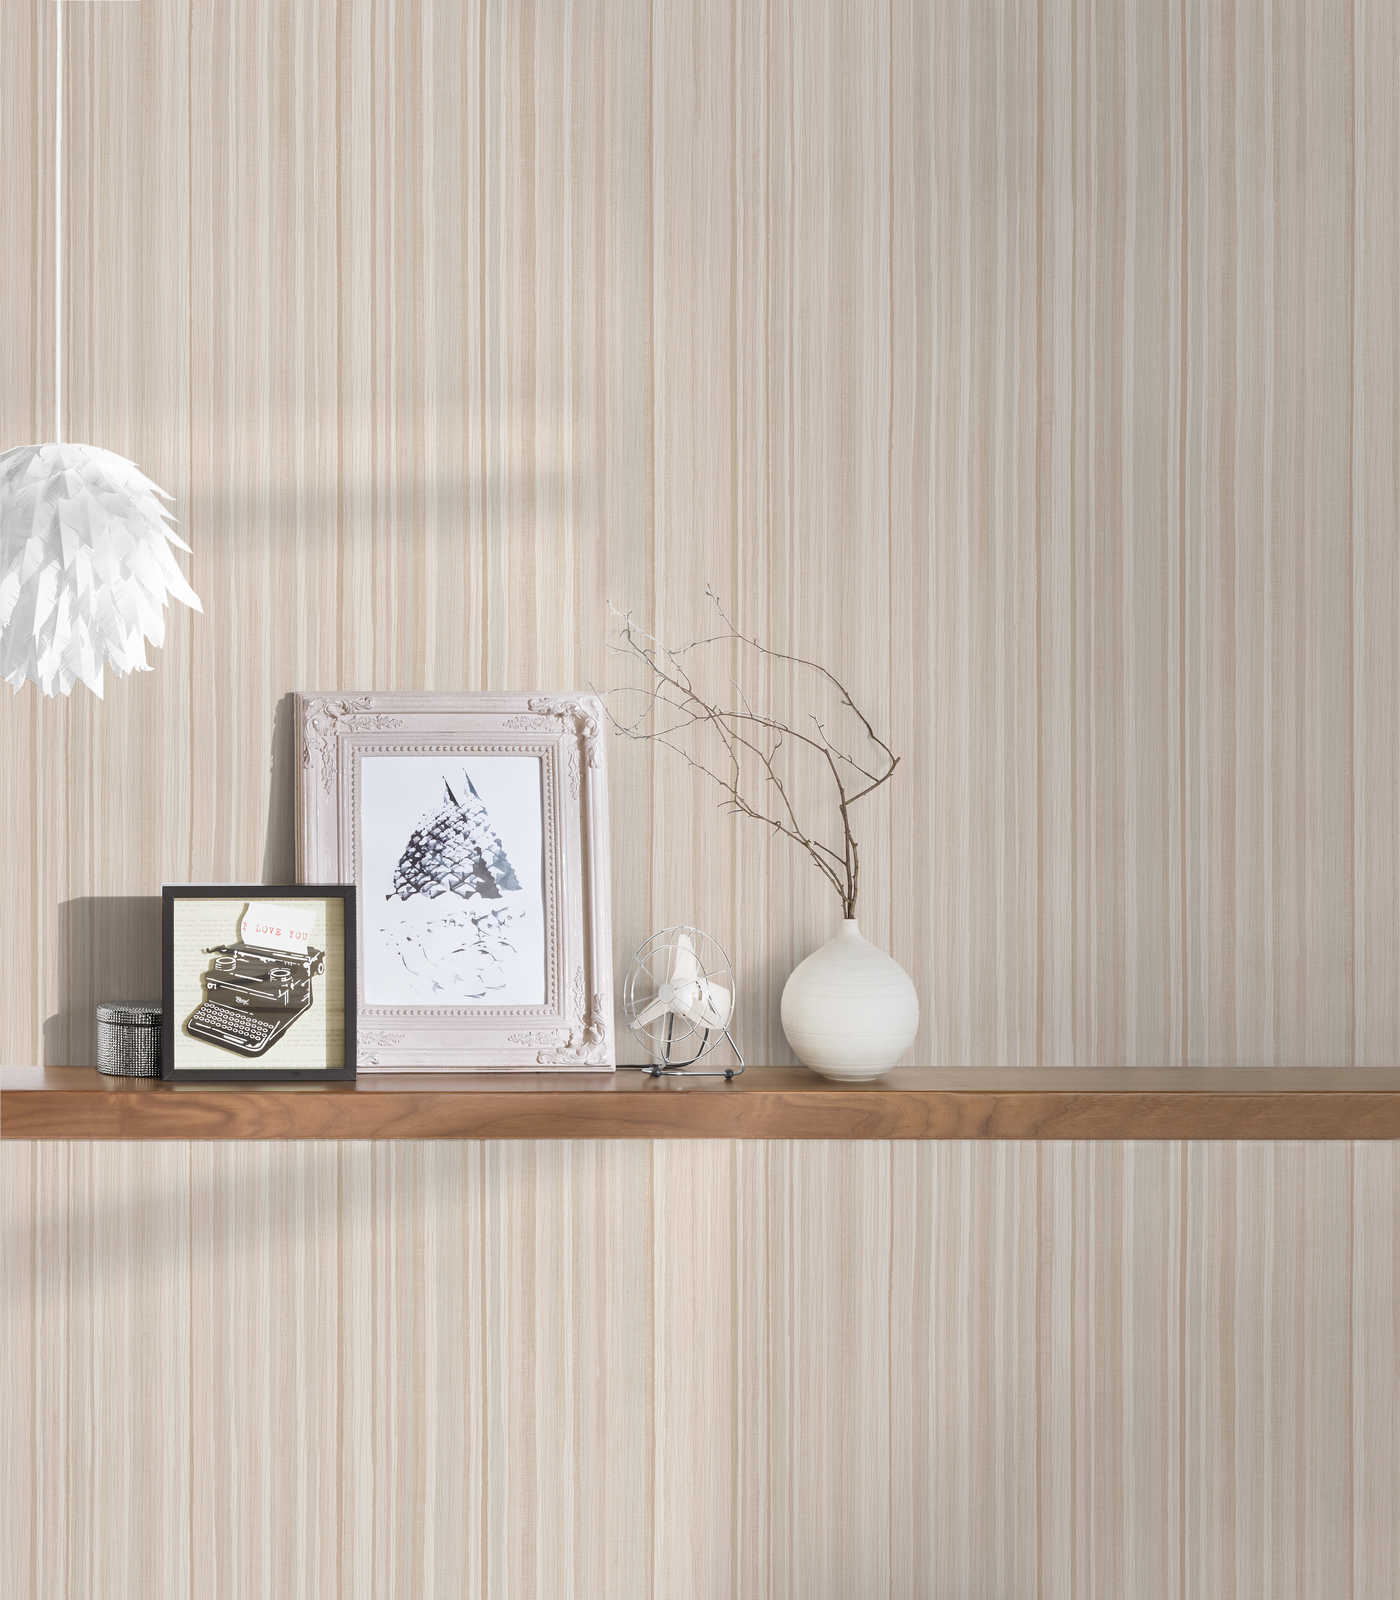             Striped wallpaper with narrow lines pattern - beige
        